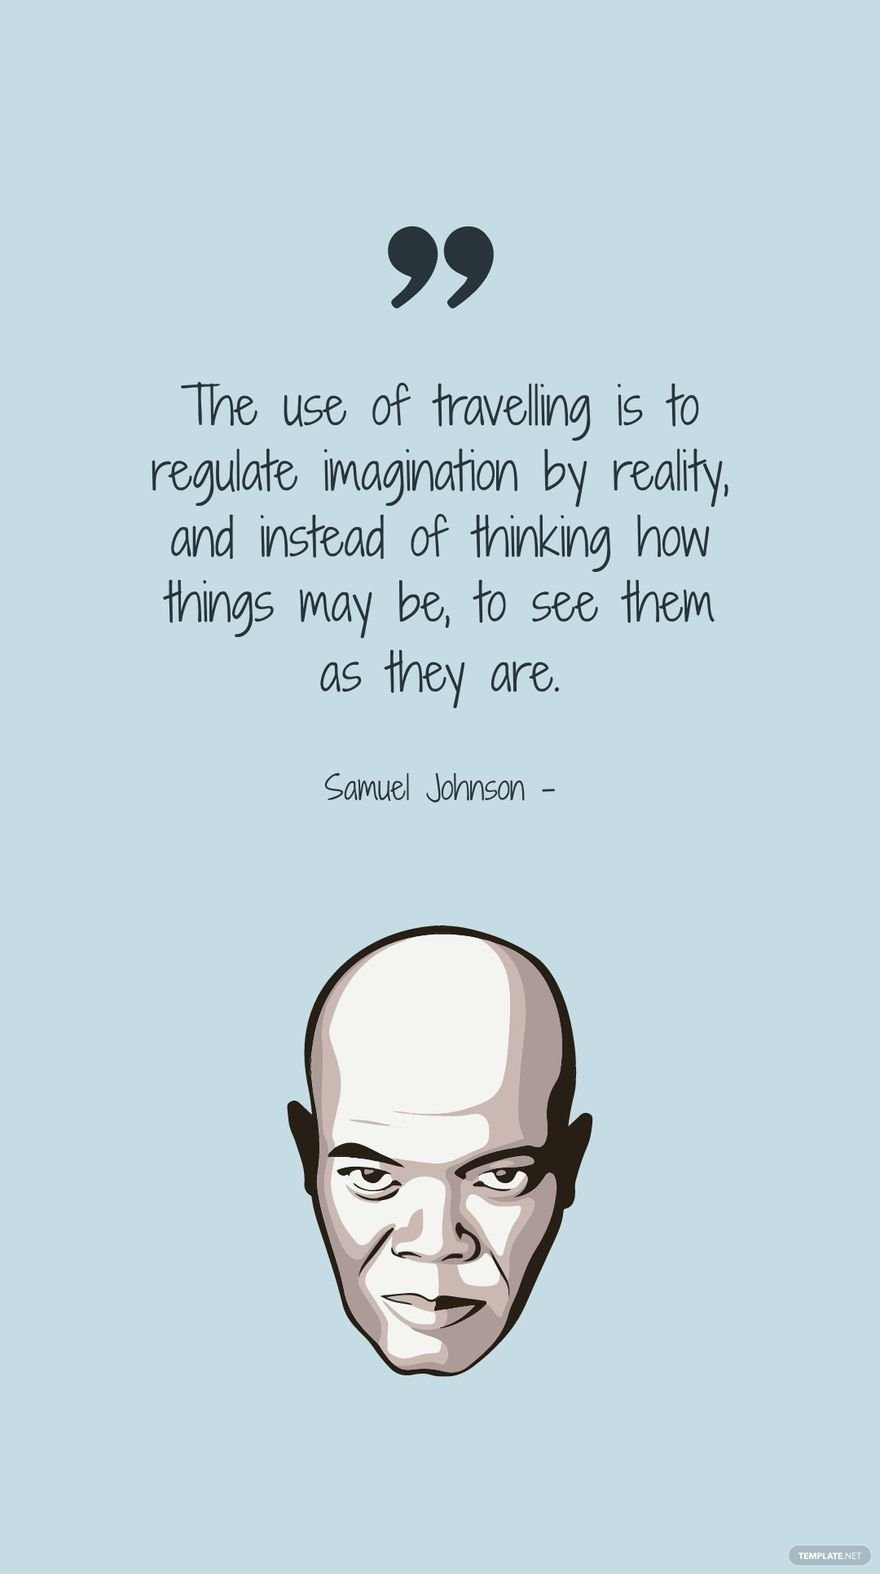 Samuel Johnson - The use of travelling is to regulate imagination by reality, and instead of thinking how things may be, to see them as they are.